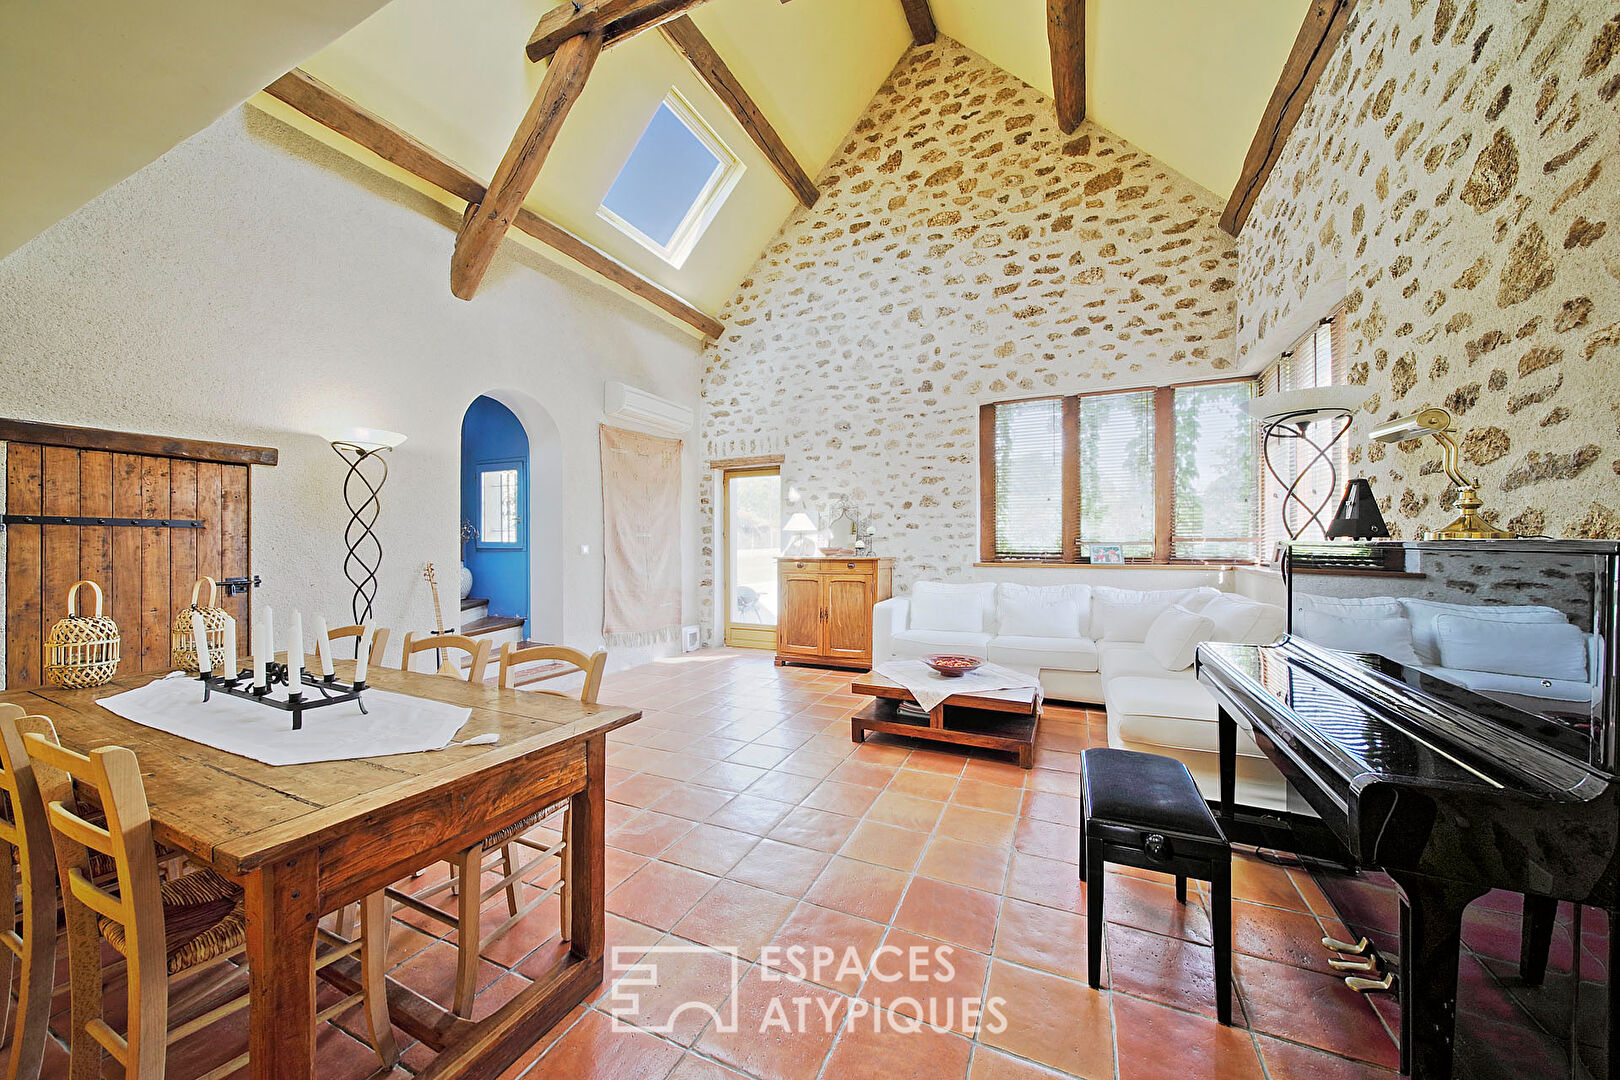 Charming renovated Briarde house and its garden